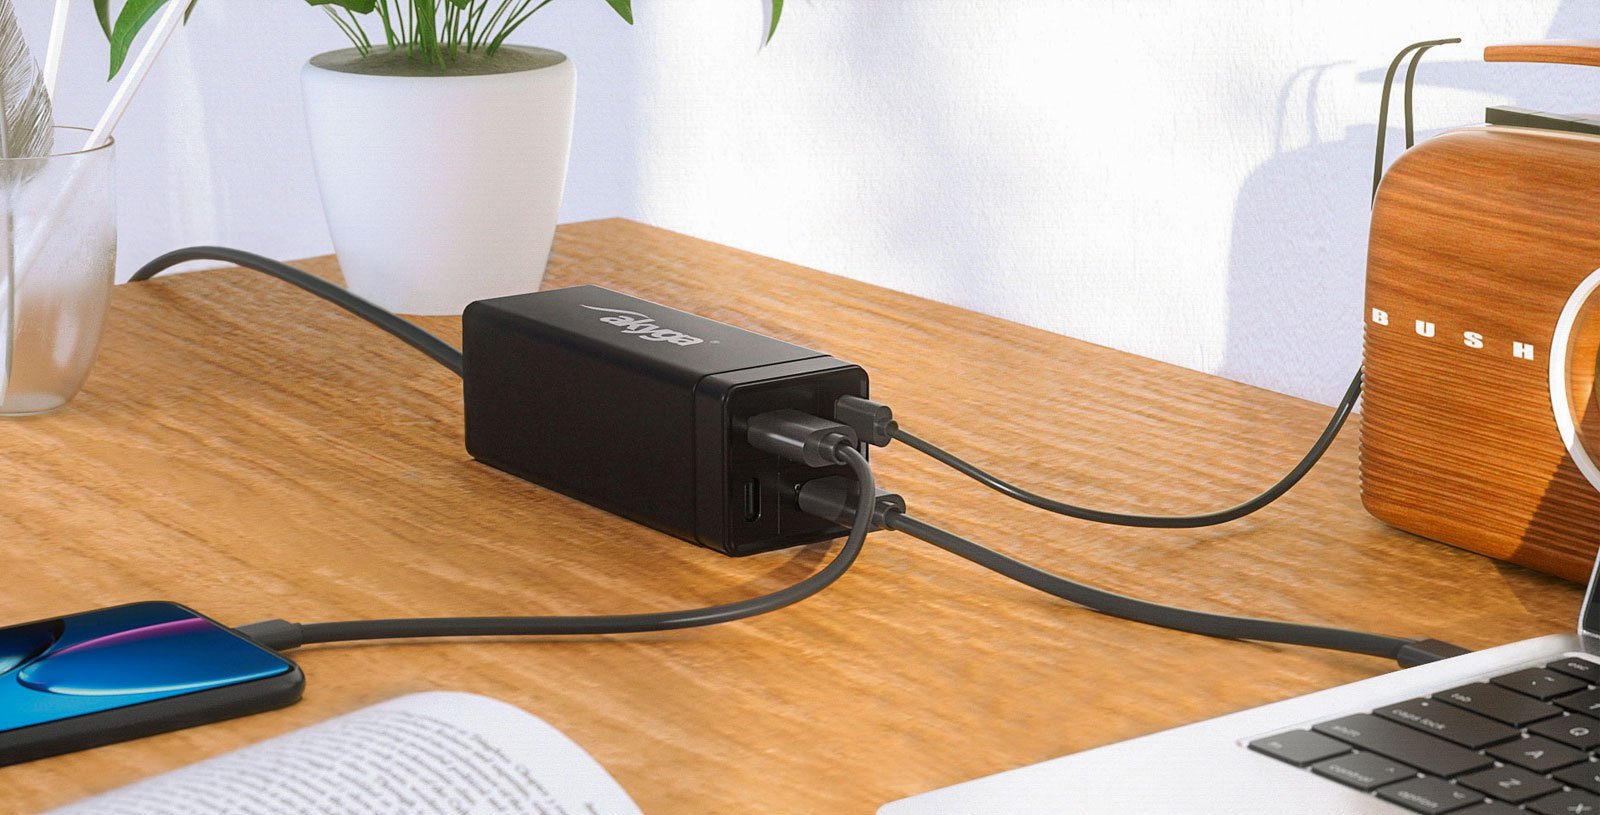 Akyga AK-CH-17 universal power supply powers a smartphone, laptop and a portable bluetooth speaker